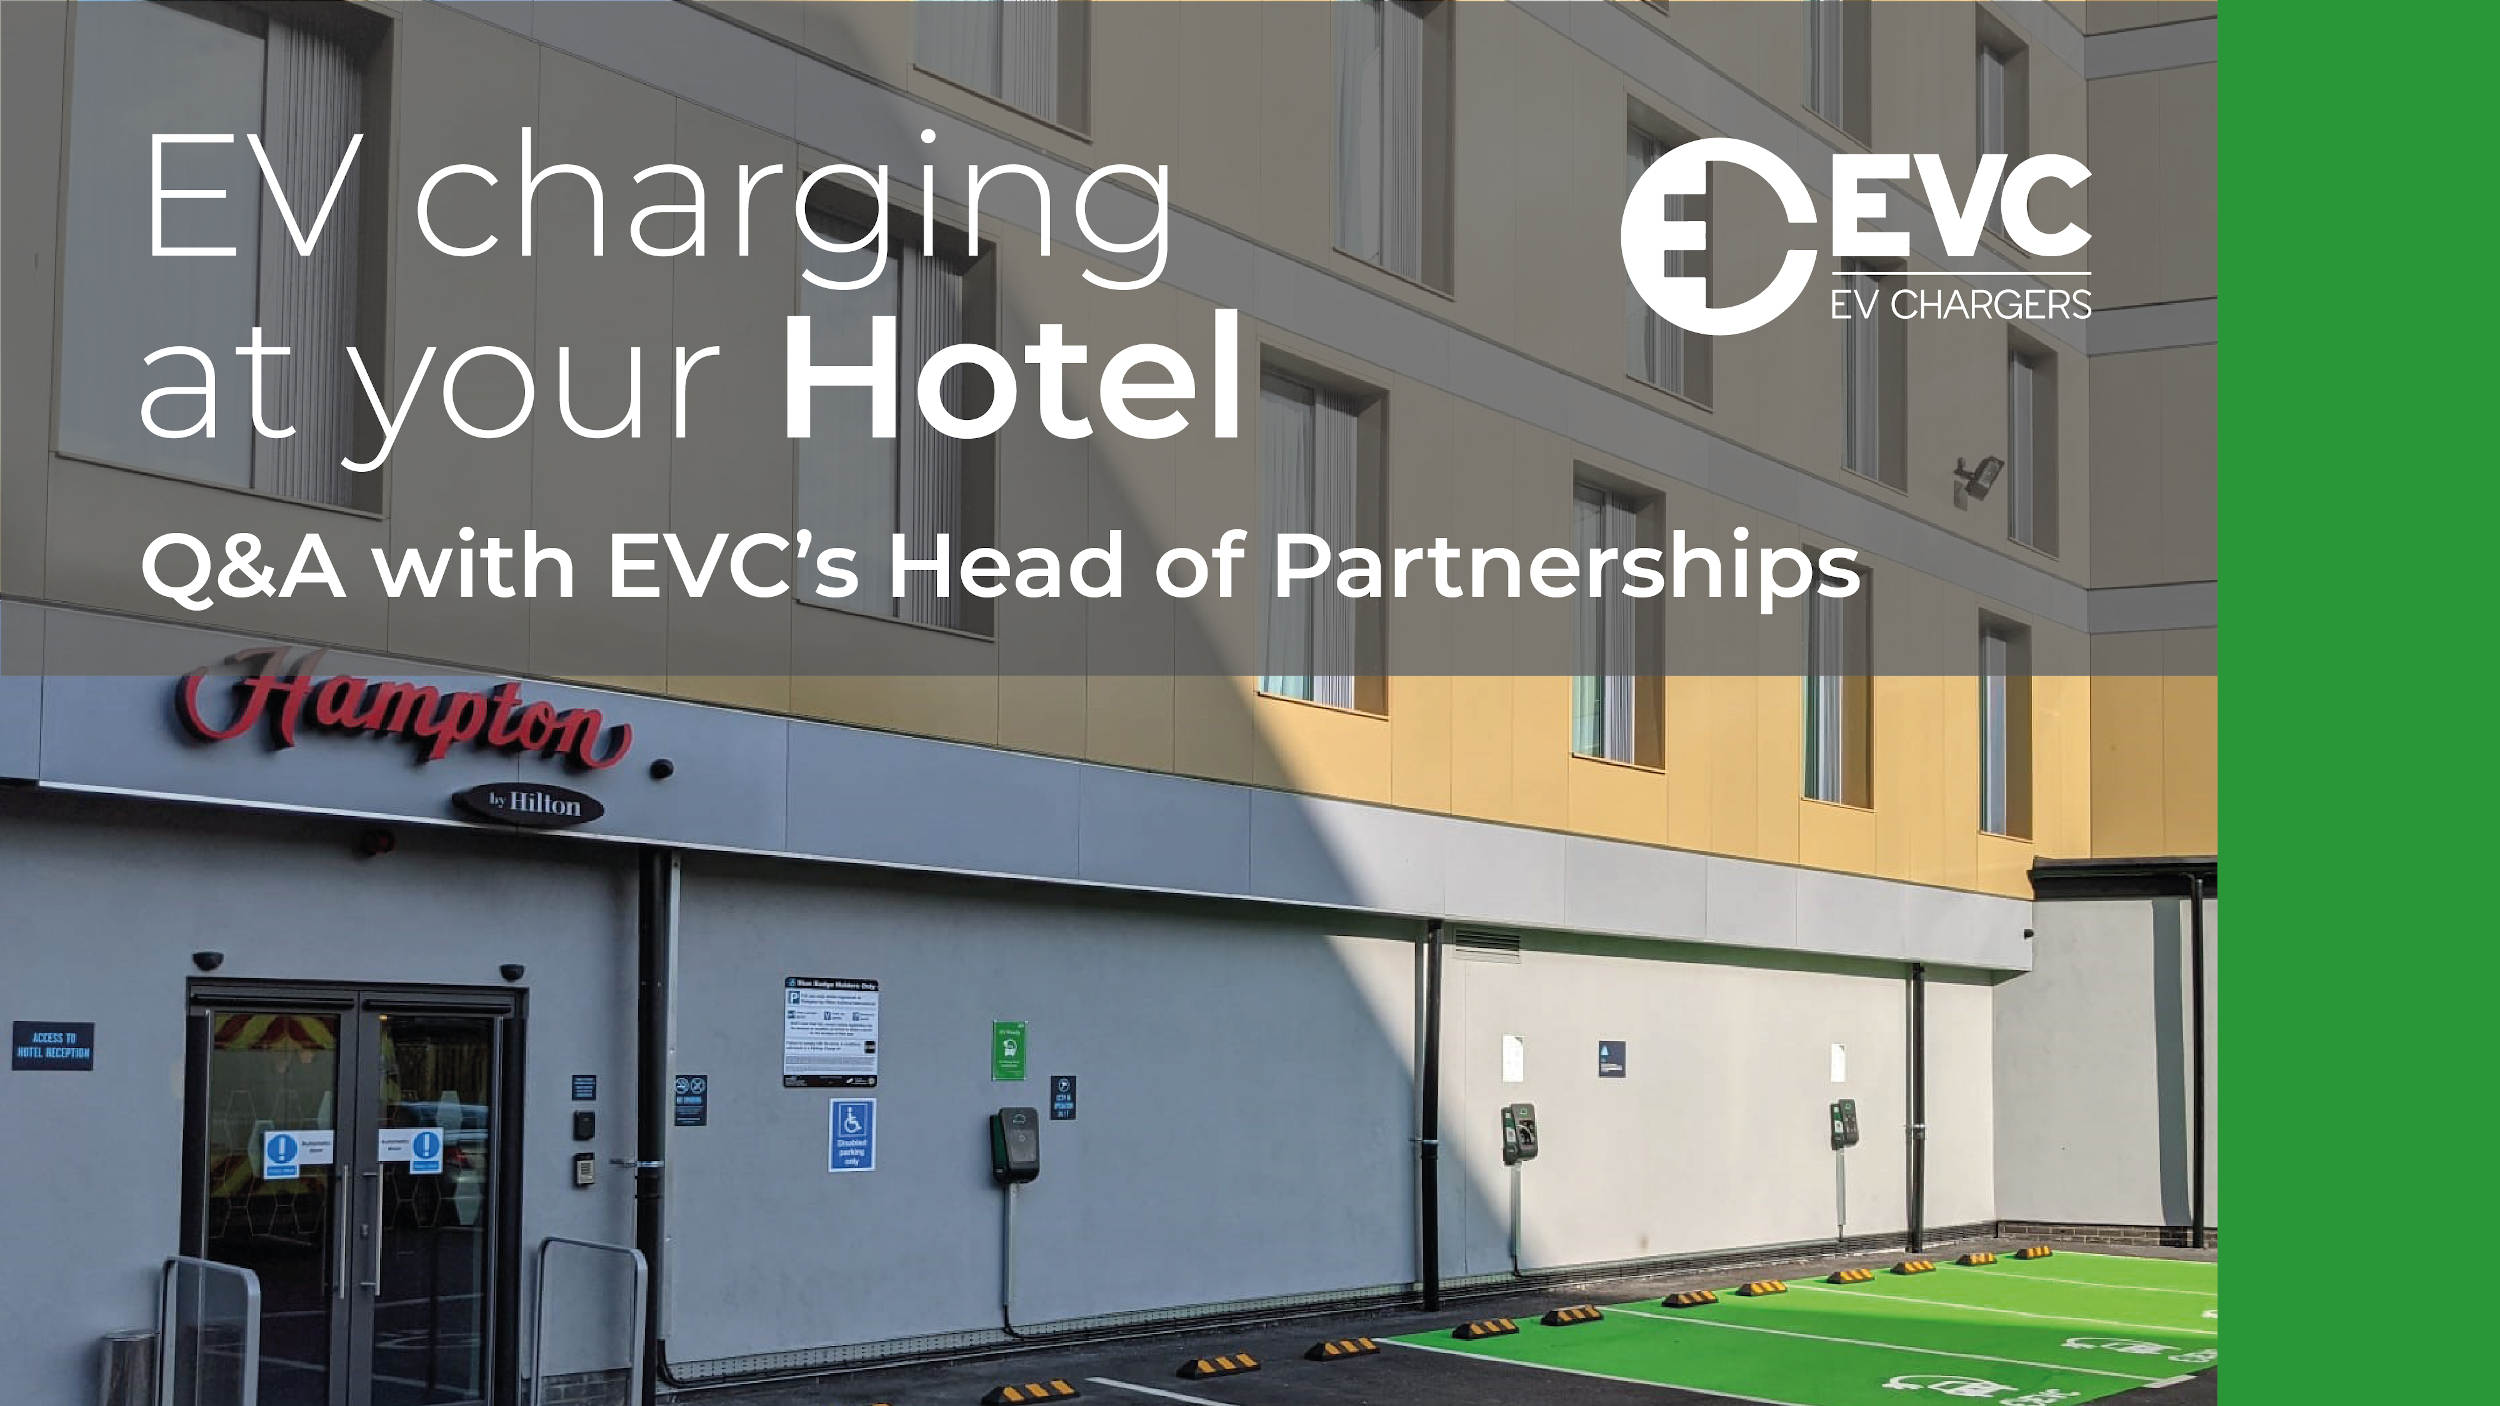 EV Charging at your Hotel – Q&A with EVC’s Head of Partnerships